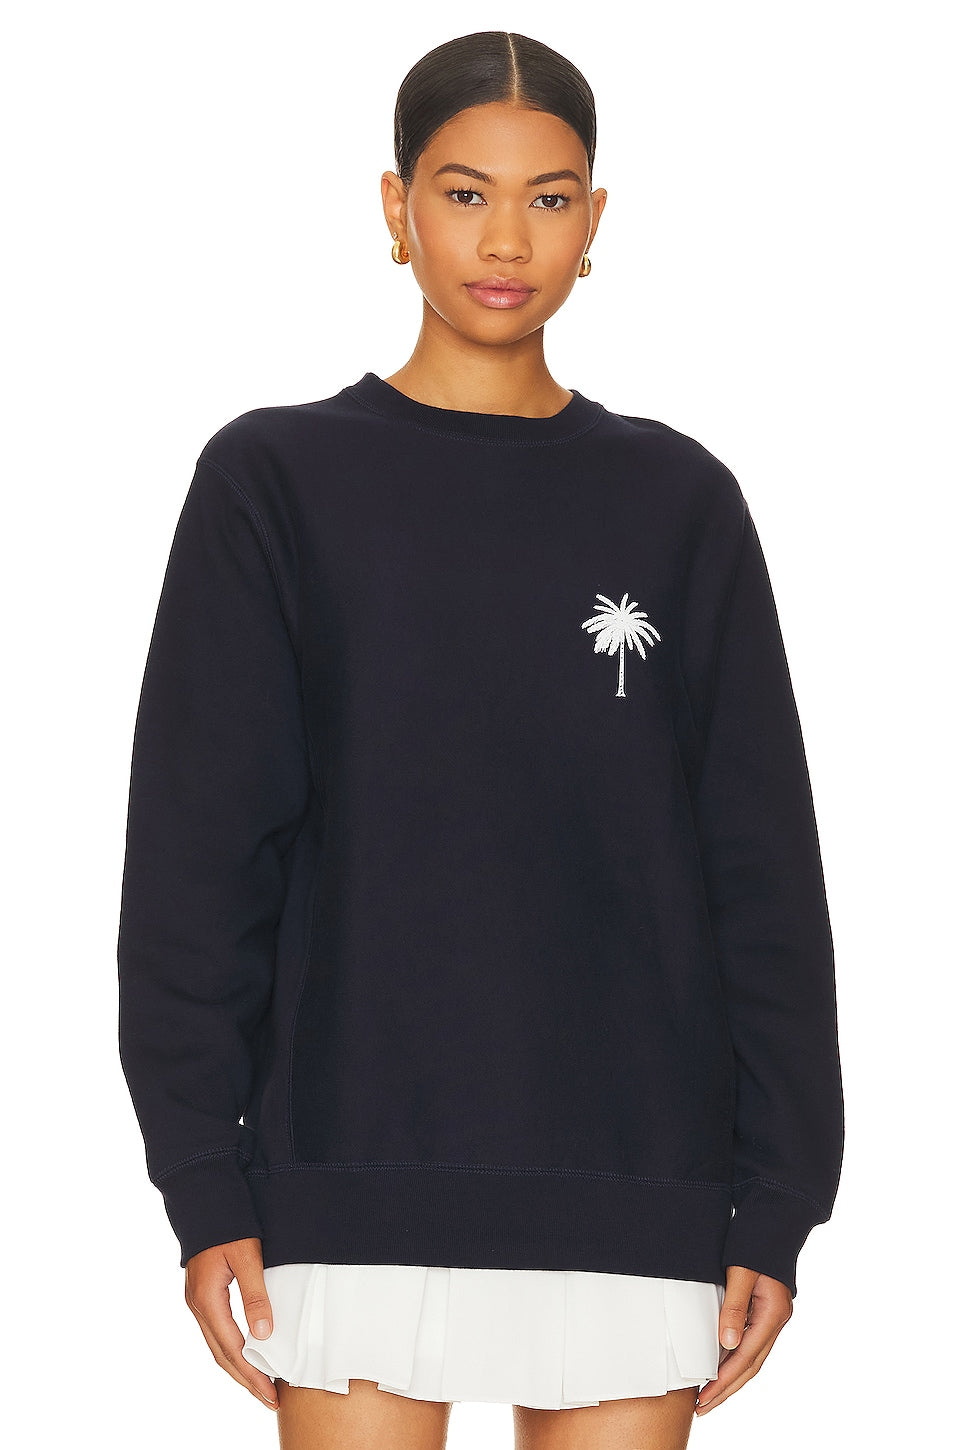 Eleven Eleven Palm Tree Crew in Classic Navy Size X-Small